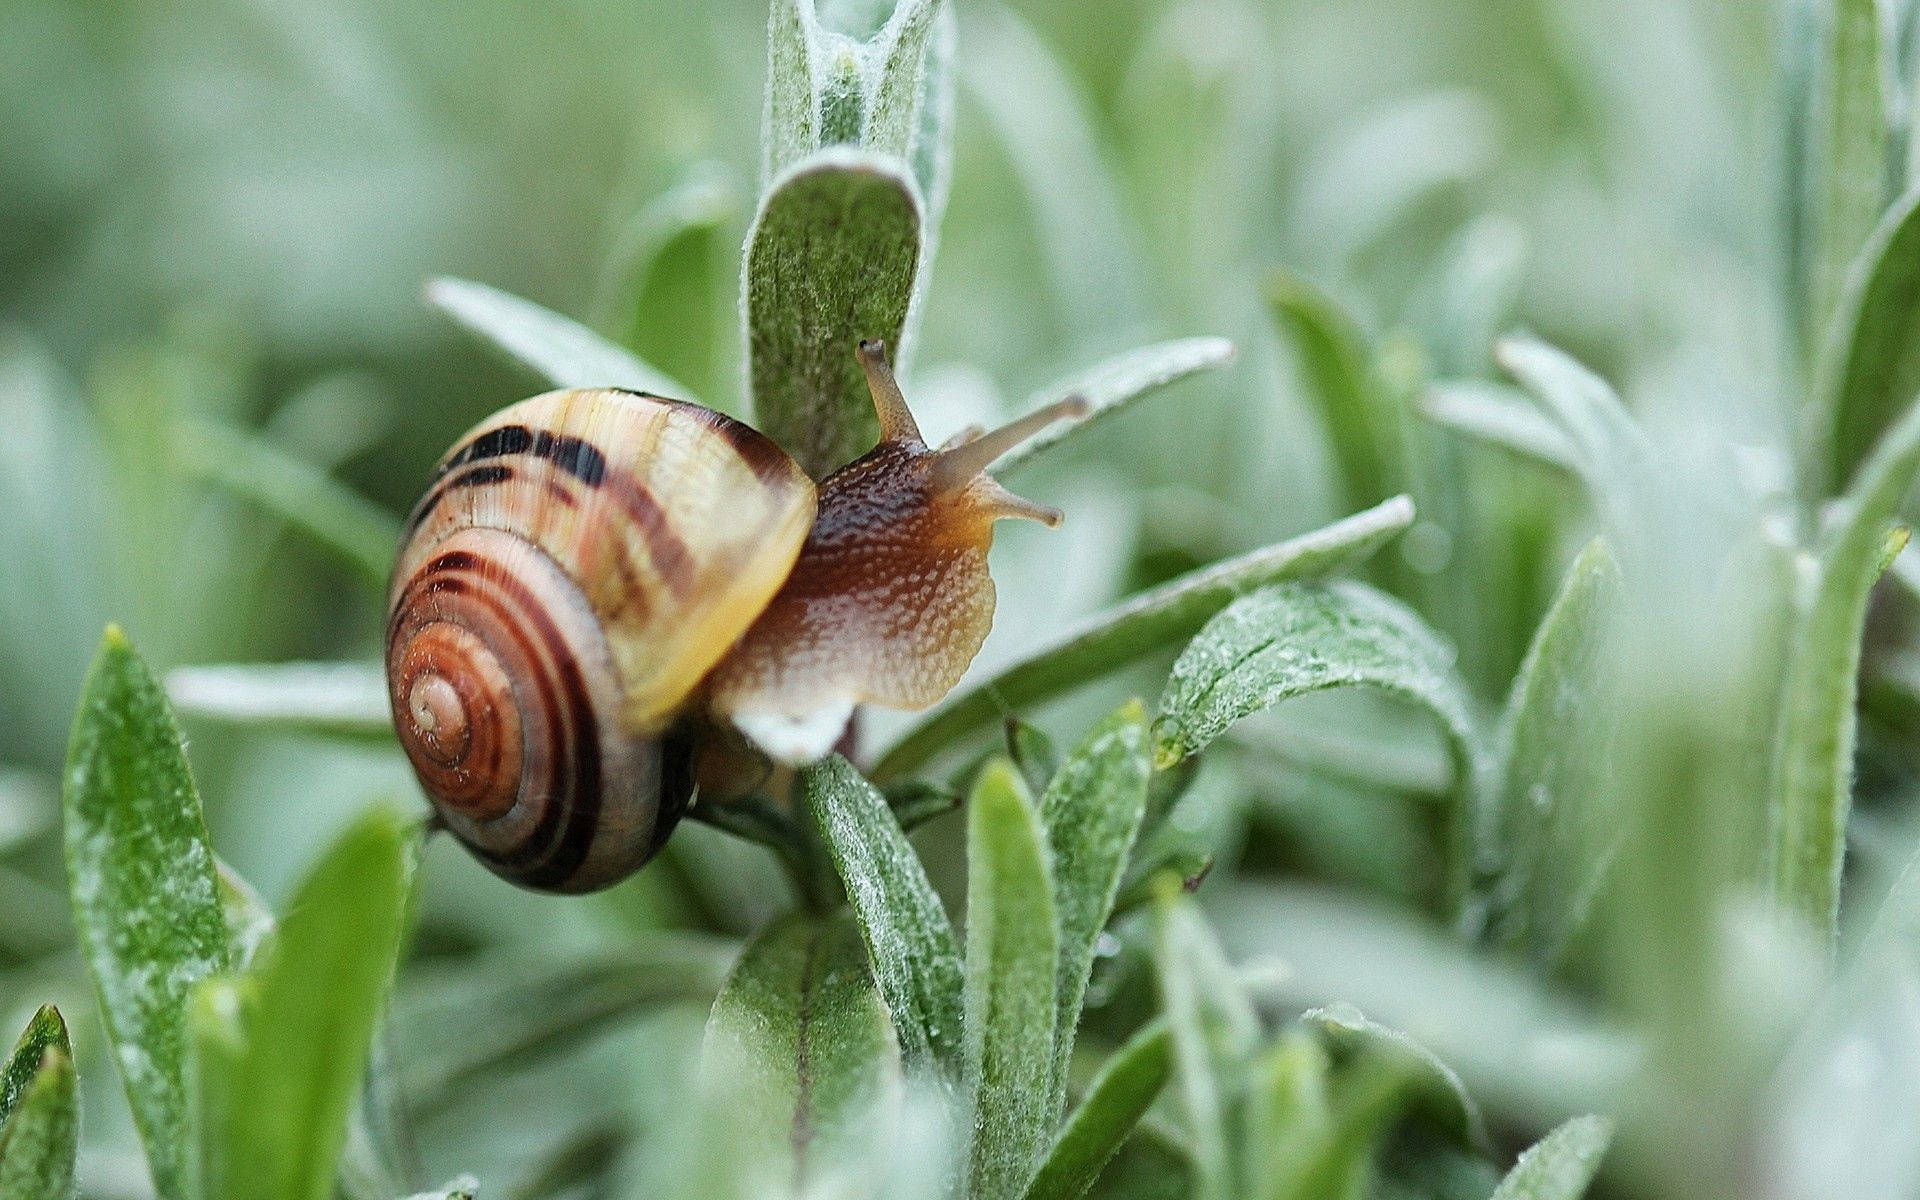 Close-up Of A Striking Snail On Green Foliage Background